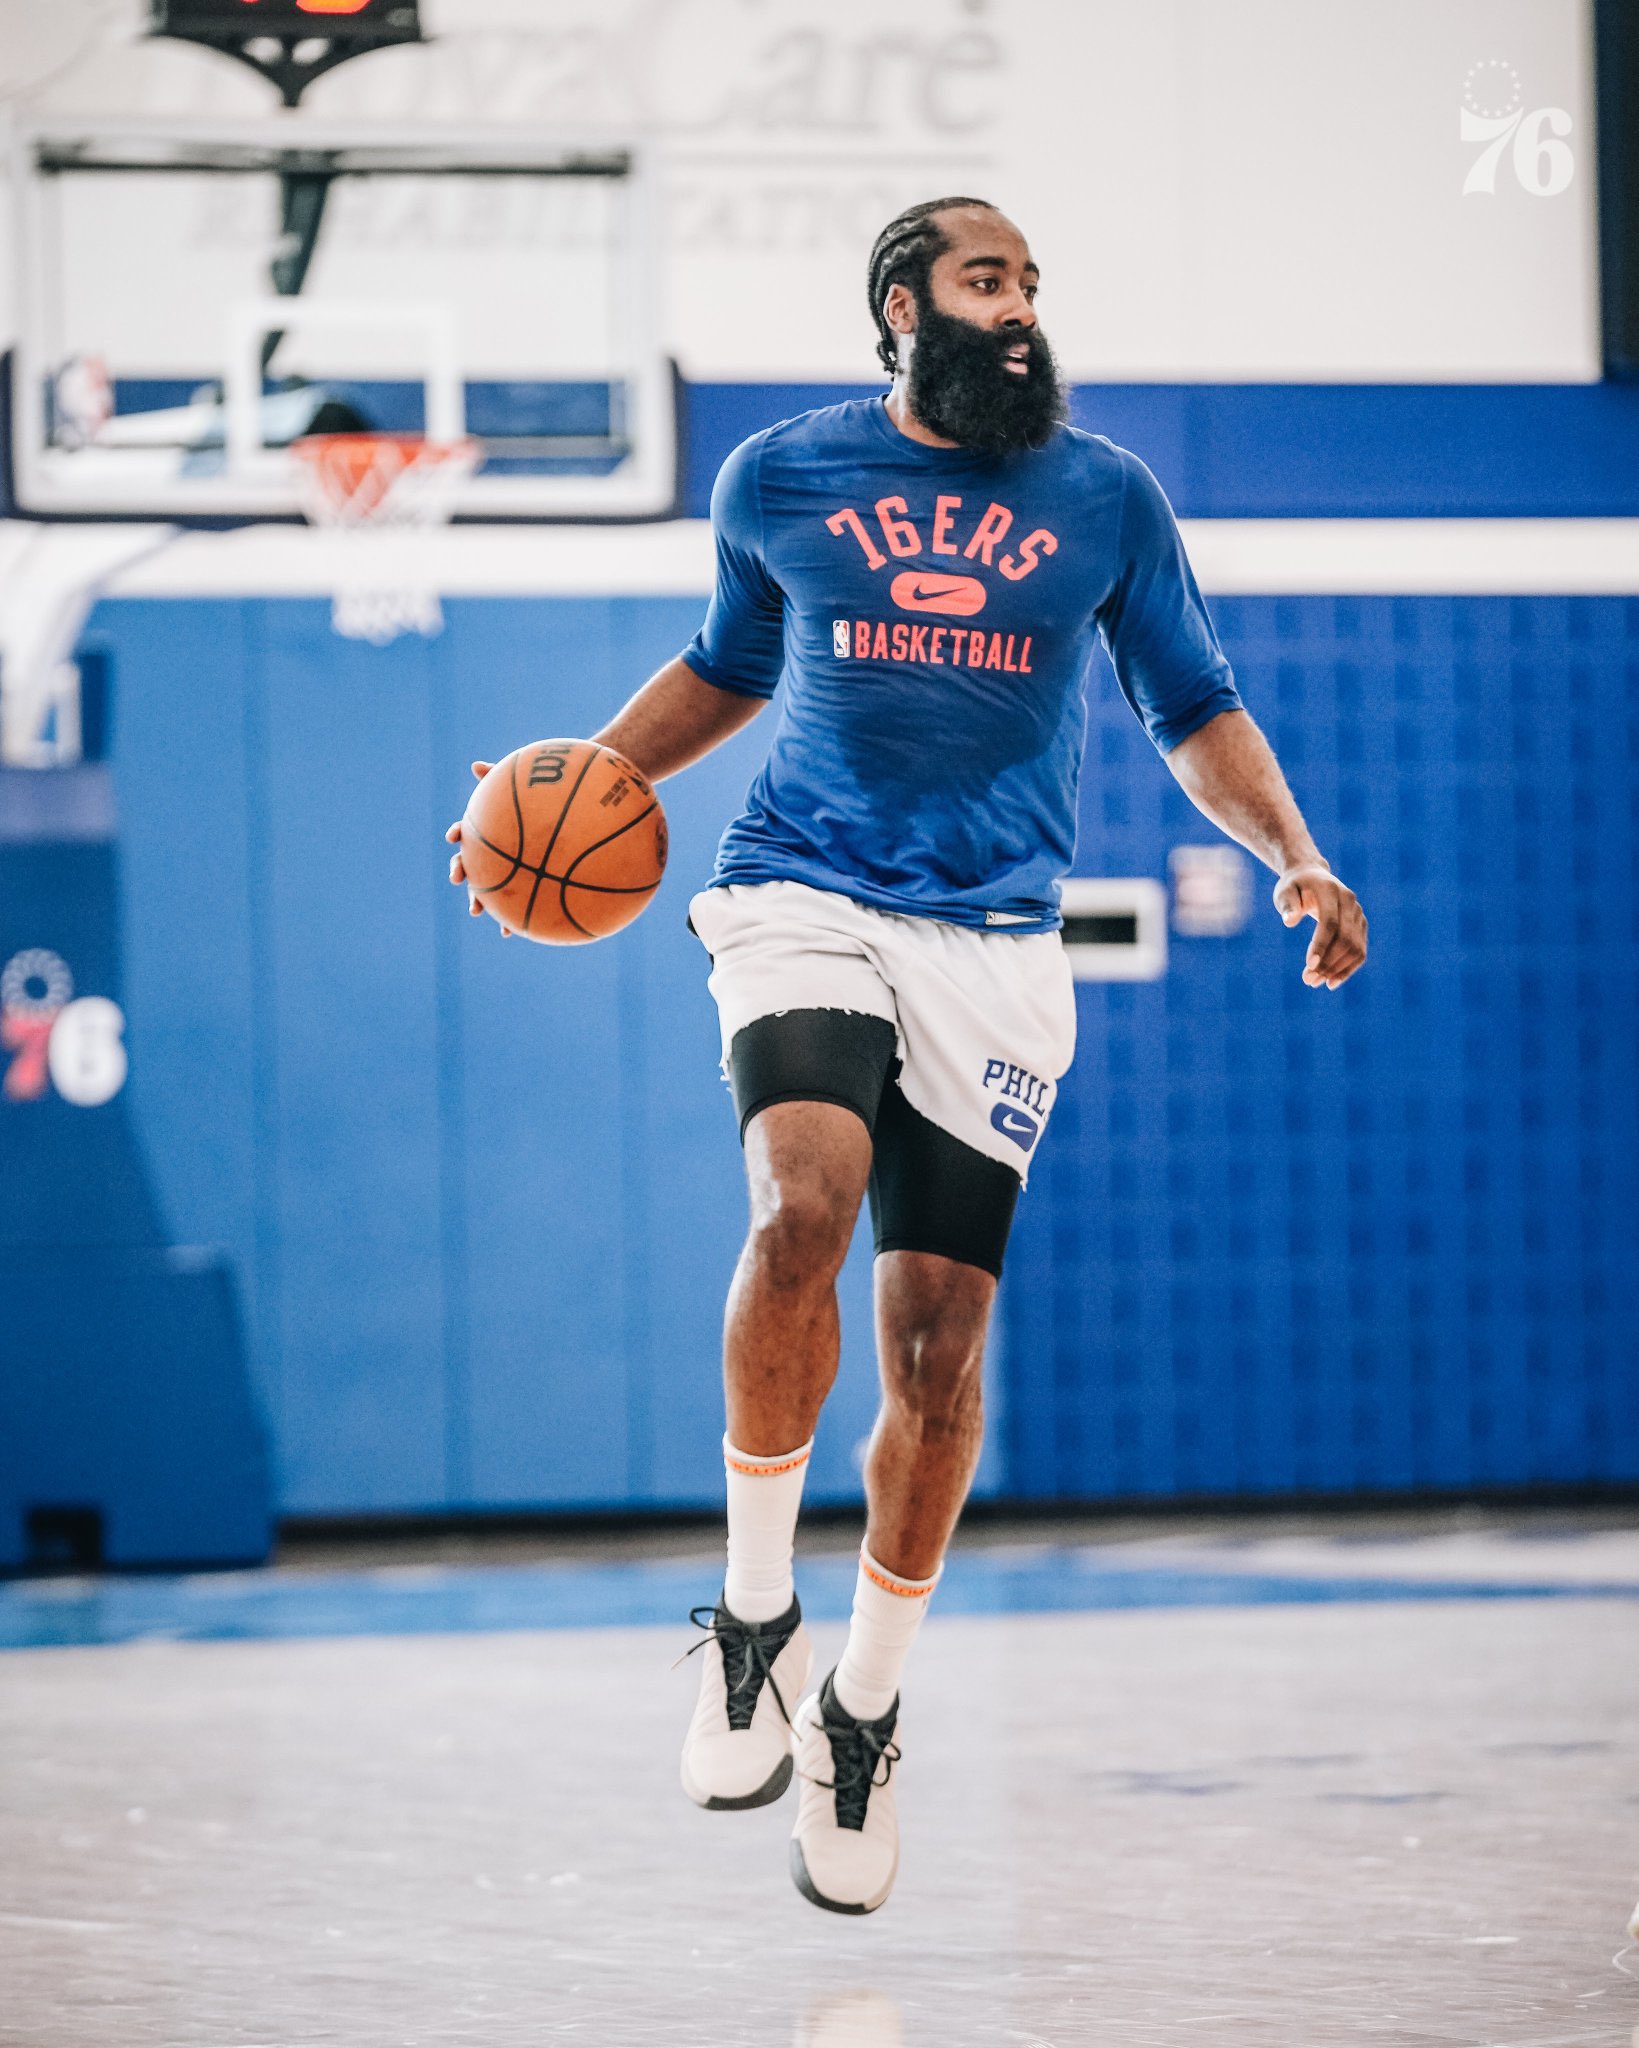 james harden outfit today｜TikTok Search